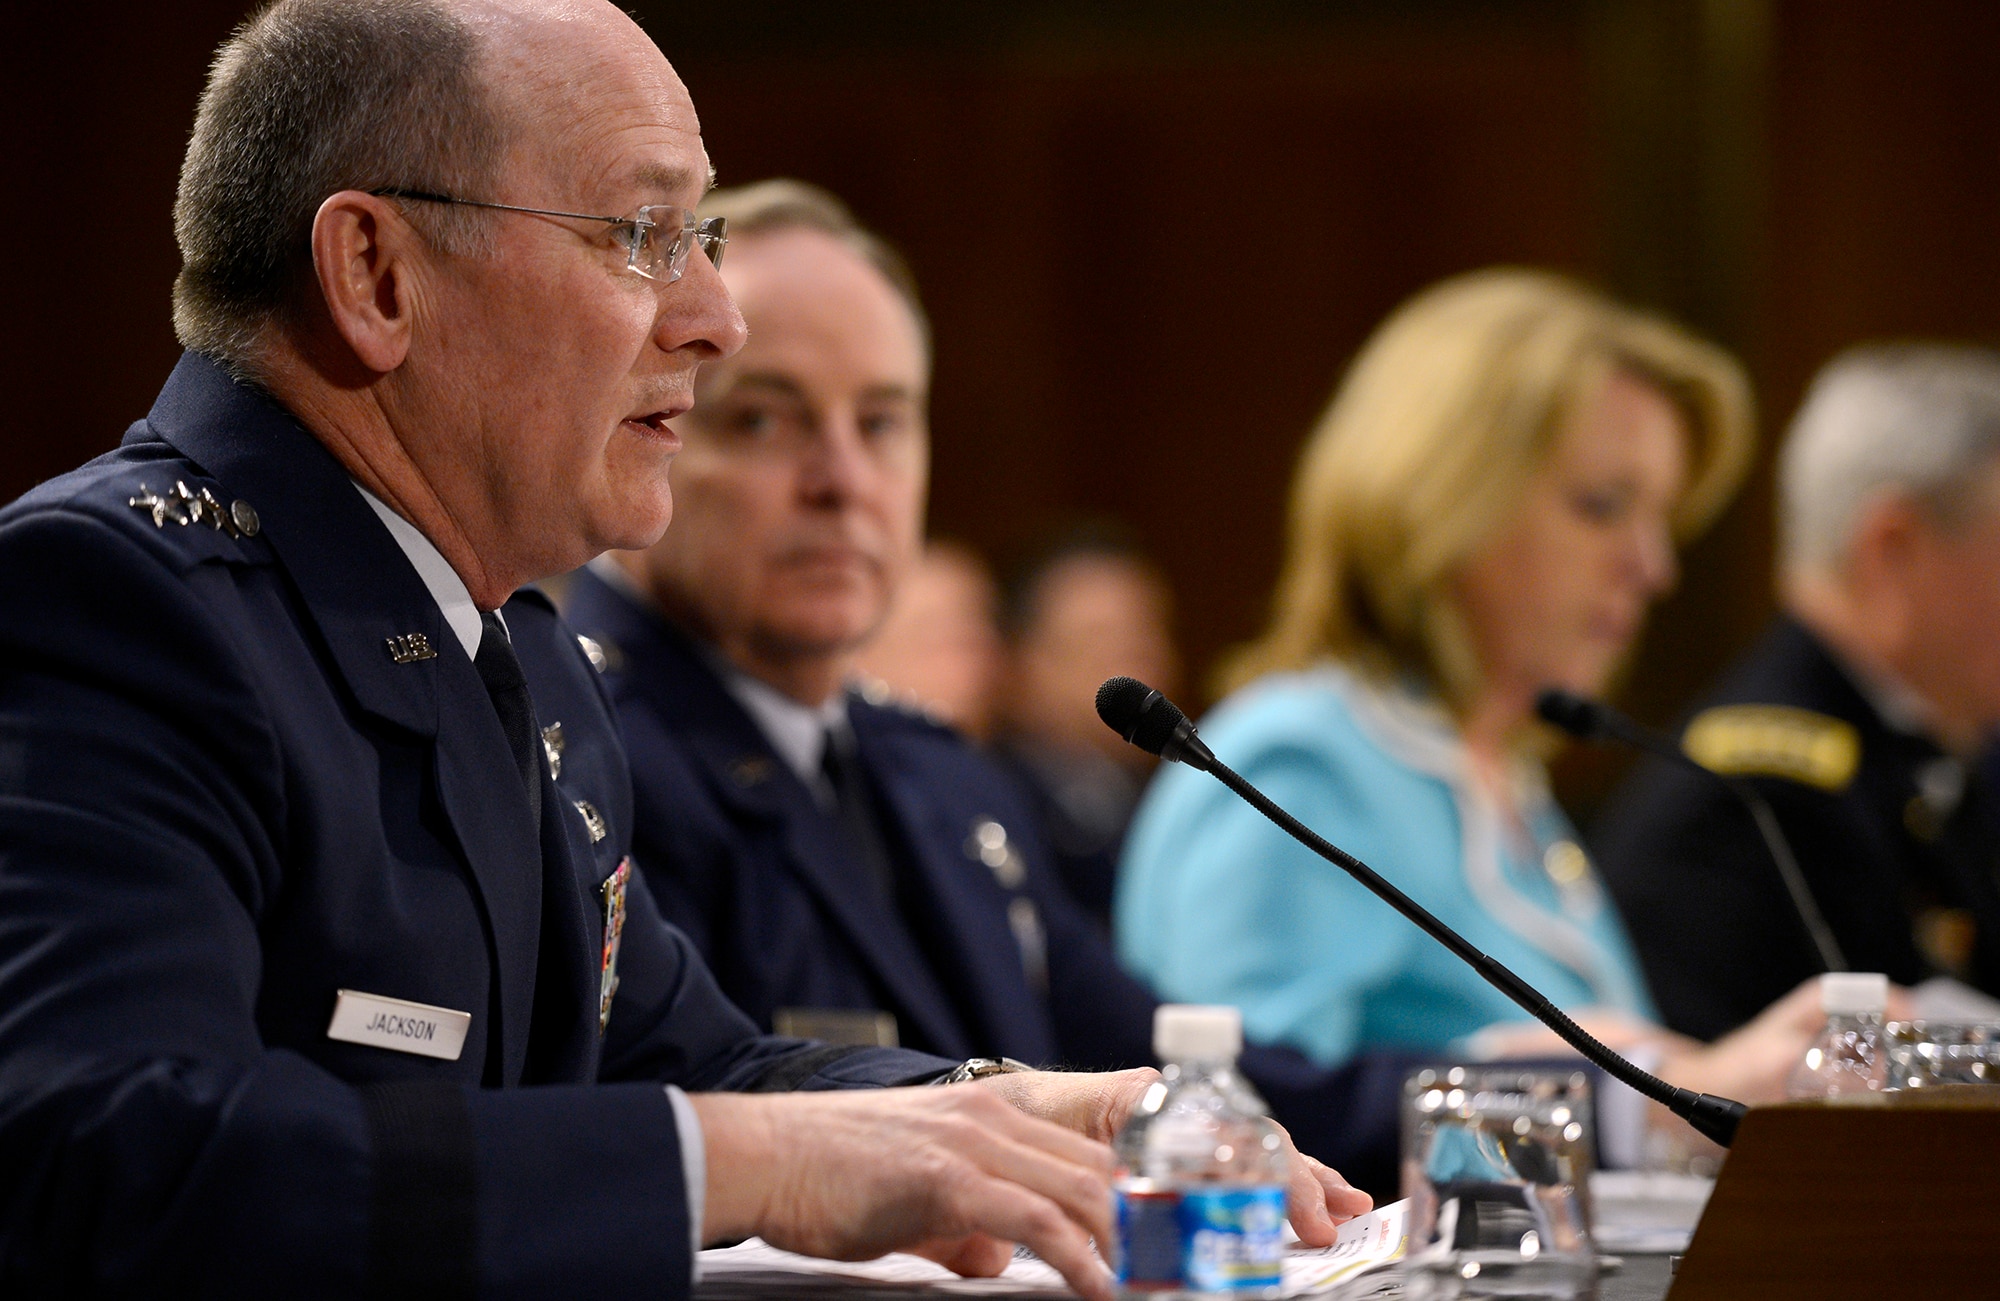 Gen. James "JJ" Jackson testifies on the Air Force posture for fiscal year 2015 before the Senate Appropriations Committee on Defense, April 2, 2014, in Washington, D.C.  Also testifying were Secretary of the Air Force Deborah Lee James; Air Force Chief of Staff Gen. Mark A. Welsh III; Gen. Frank J. Grass, the National Guard bureau chief; and Lt. Gen. Stanley E. Clarke III, the Air National Guard director. Jackson is the Air Force Reserve chief  (U.S. Air Force photo/Scott M. Ash)